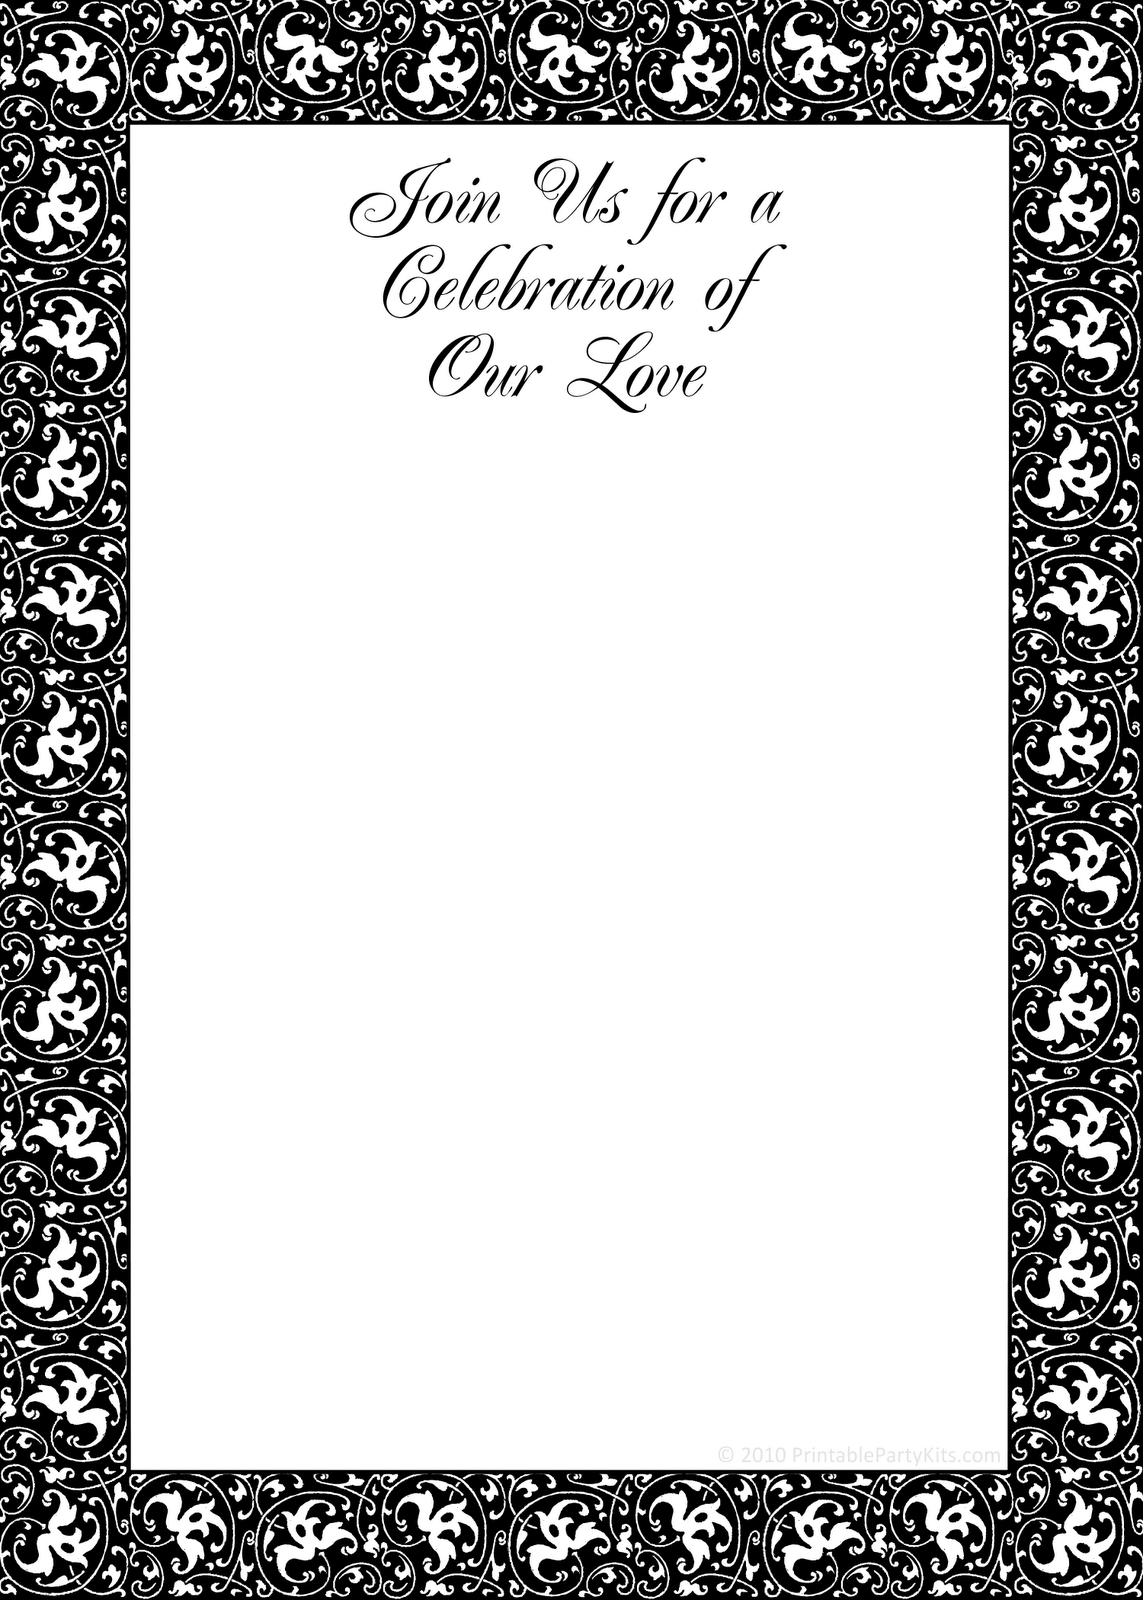 8 Best Images of Black And White Birthday Invitation Templates